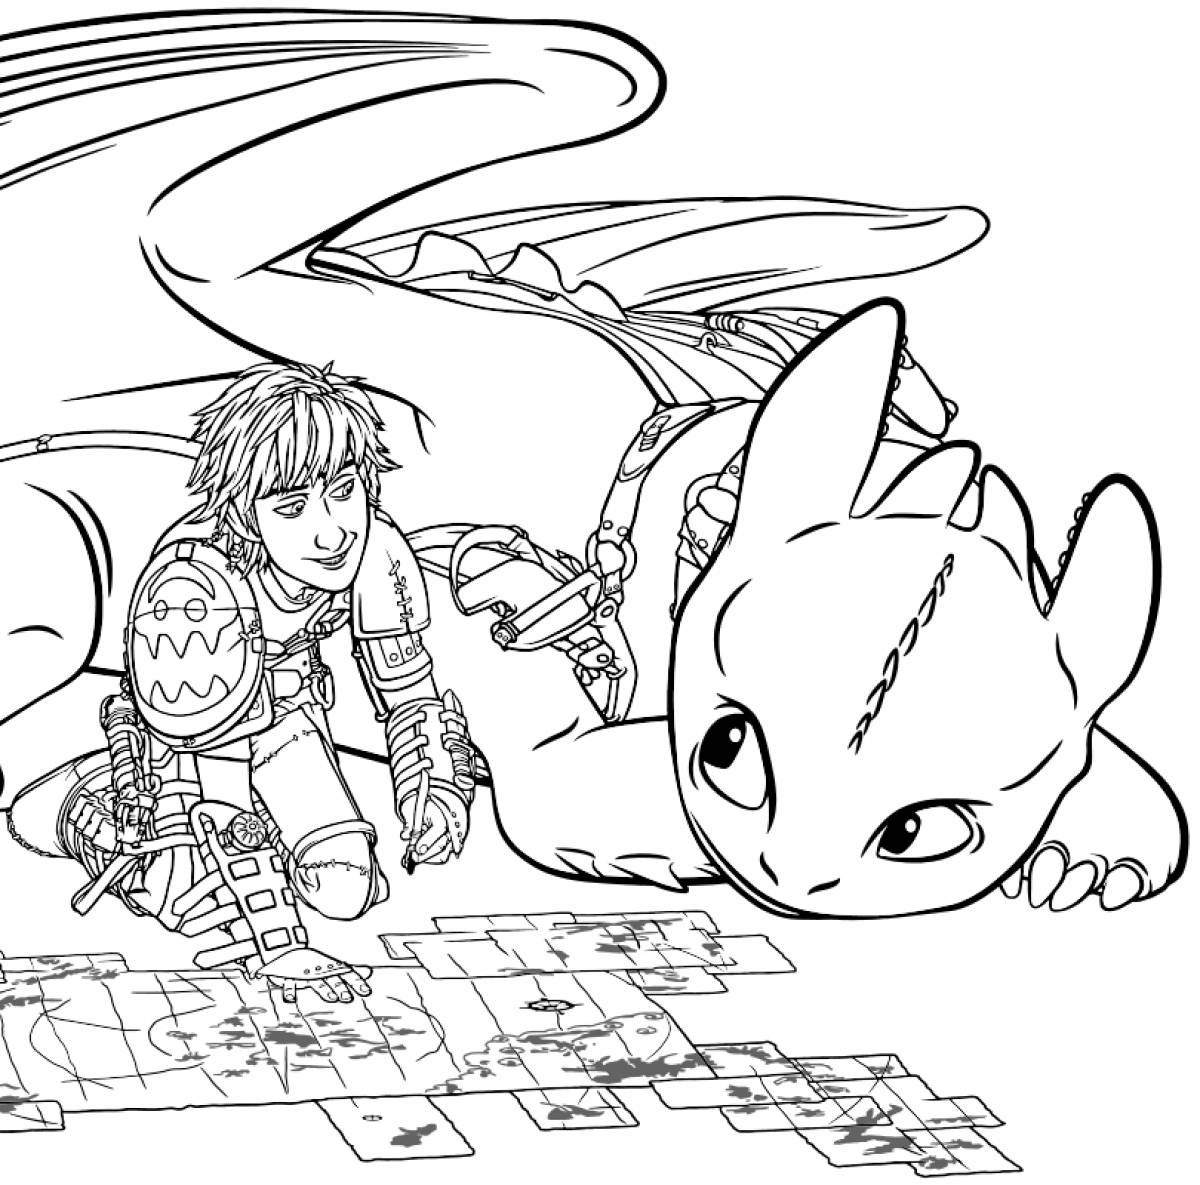 Toothless and hiccup